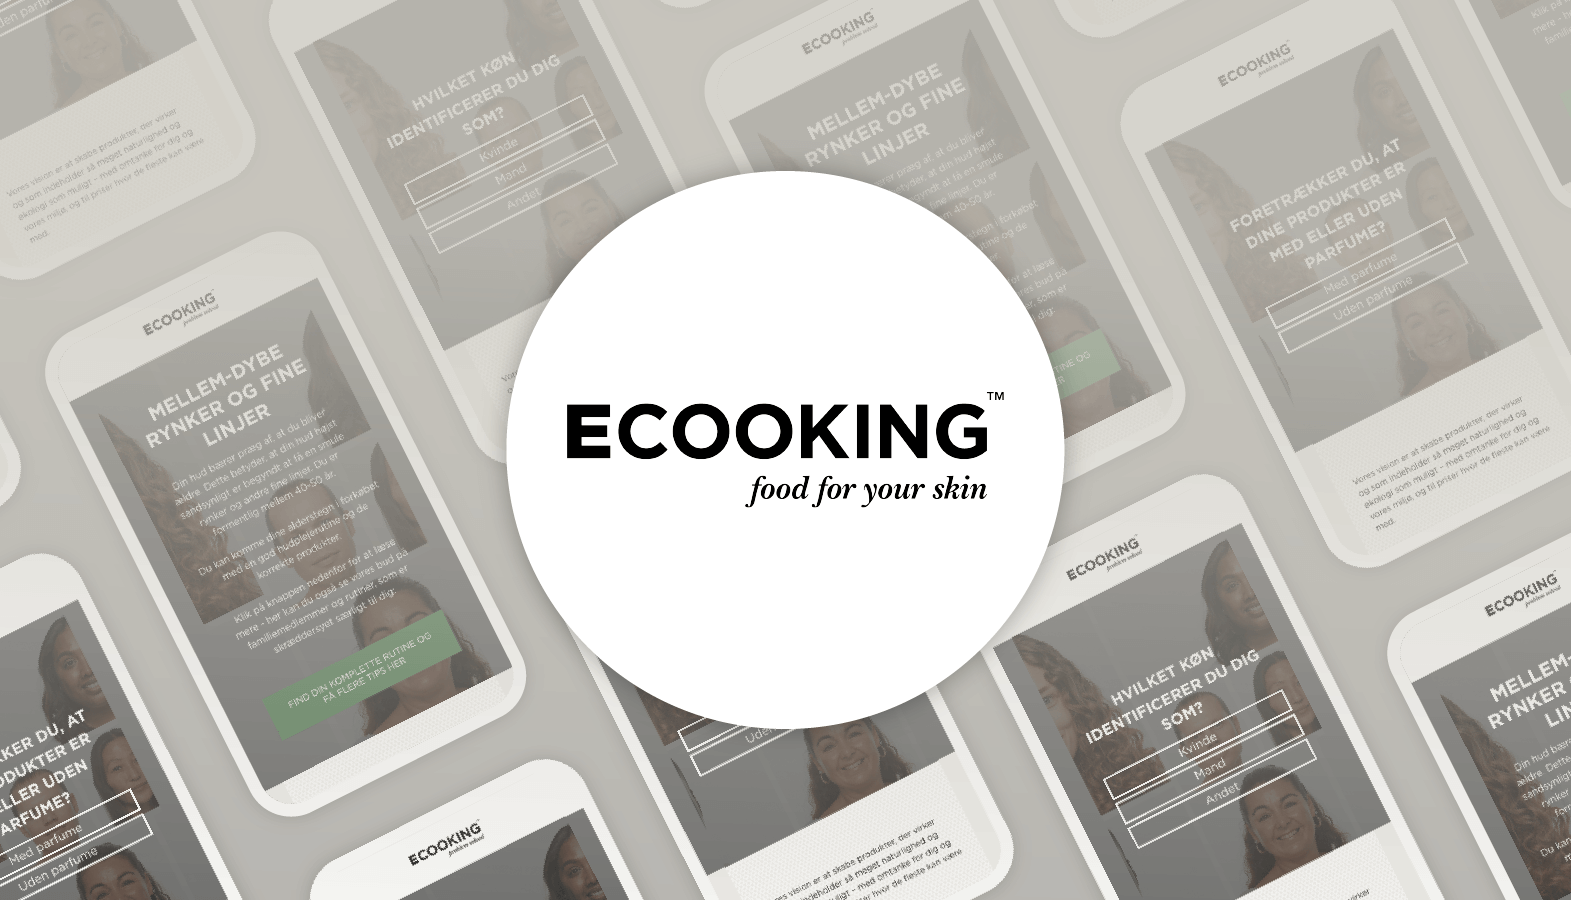 Ecooking Customer Story with Playable